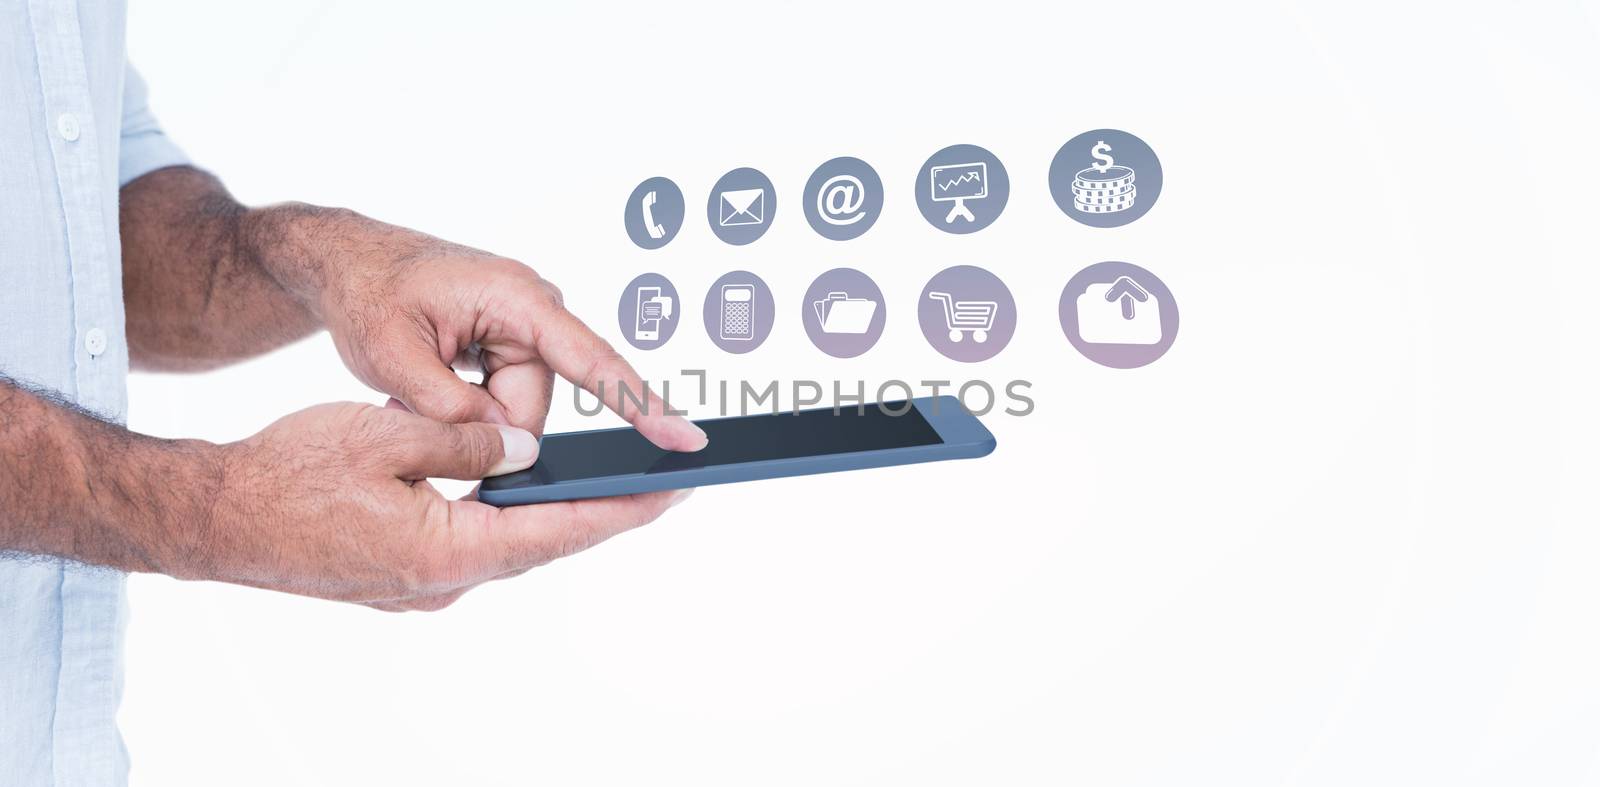 A man using tablet computer  against telephone apps icons 